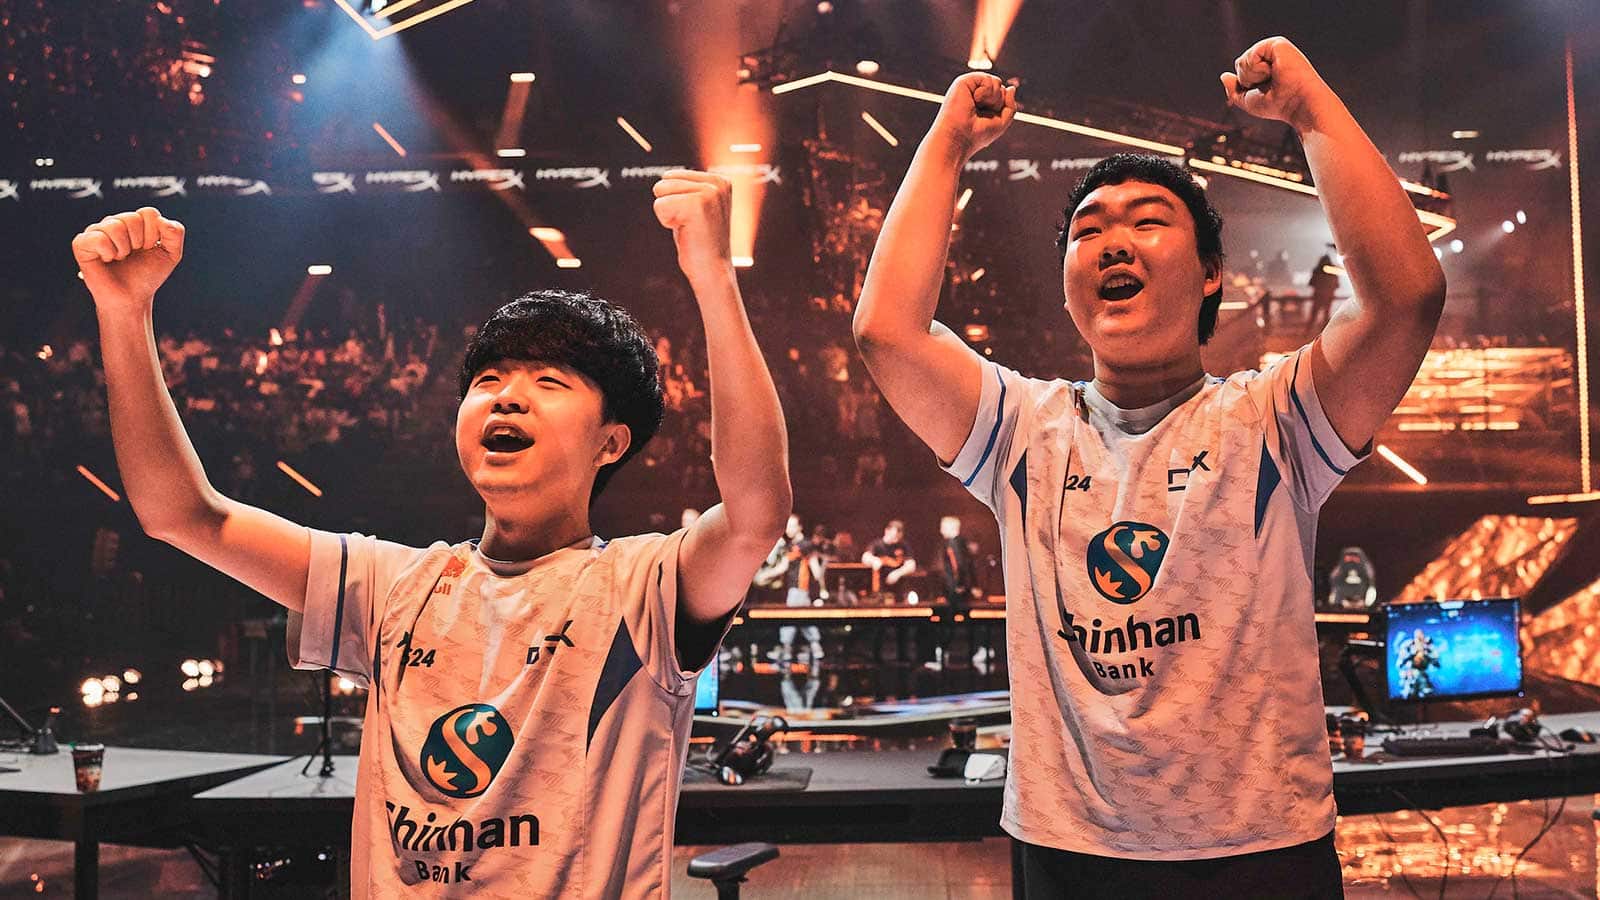 DRX on X: In the Champions, @DRX_VS was epic. GGWP. Whatever the results  were, our every step has become a new chapter of DRX and VALORANT history.  So proud, and thanks for